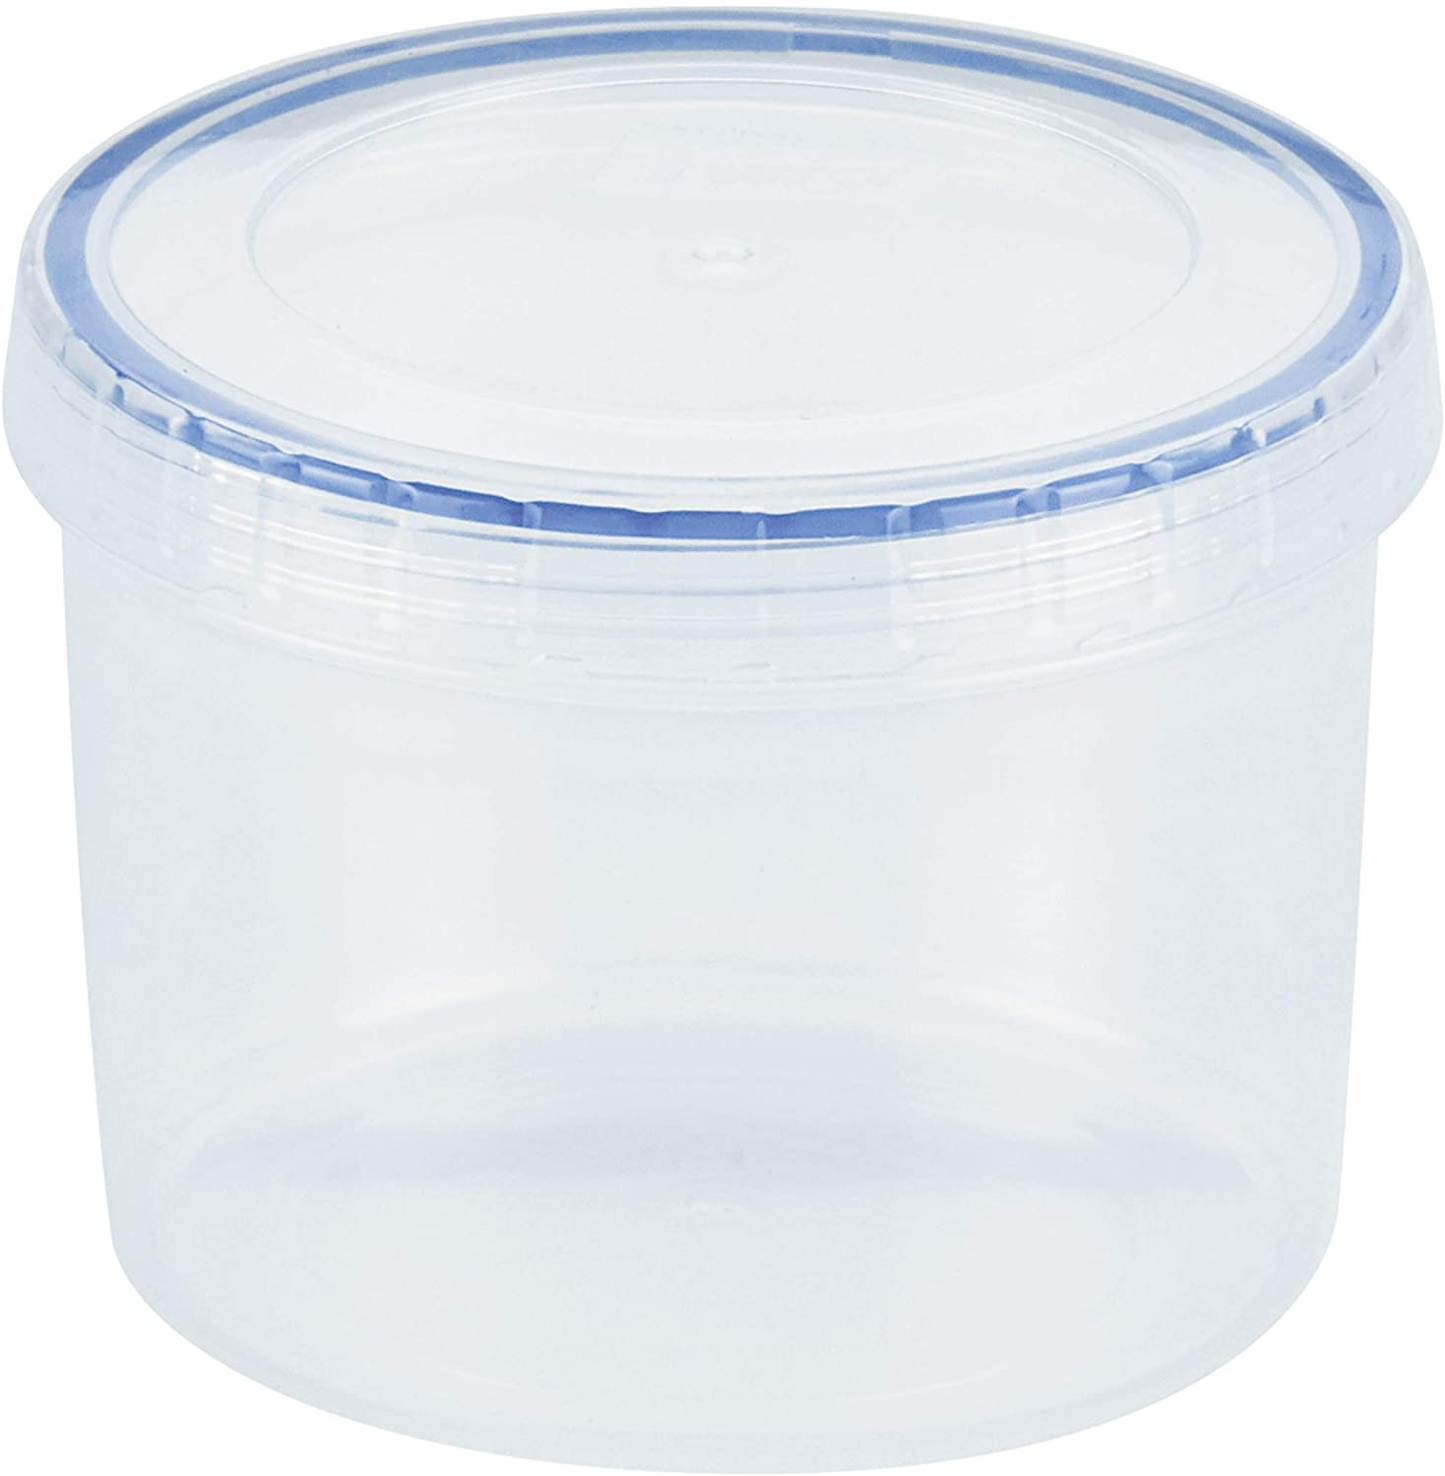 LOCK & LOCK Easy Essentials Twist Food Storage lids/Airtight containers, BPA Free, Short - 5 oz - for Candies, Clear